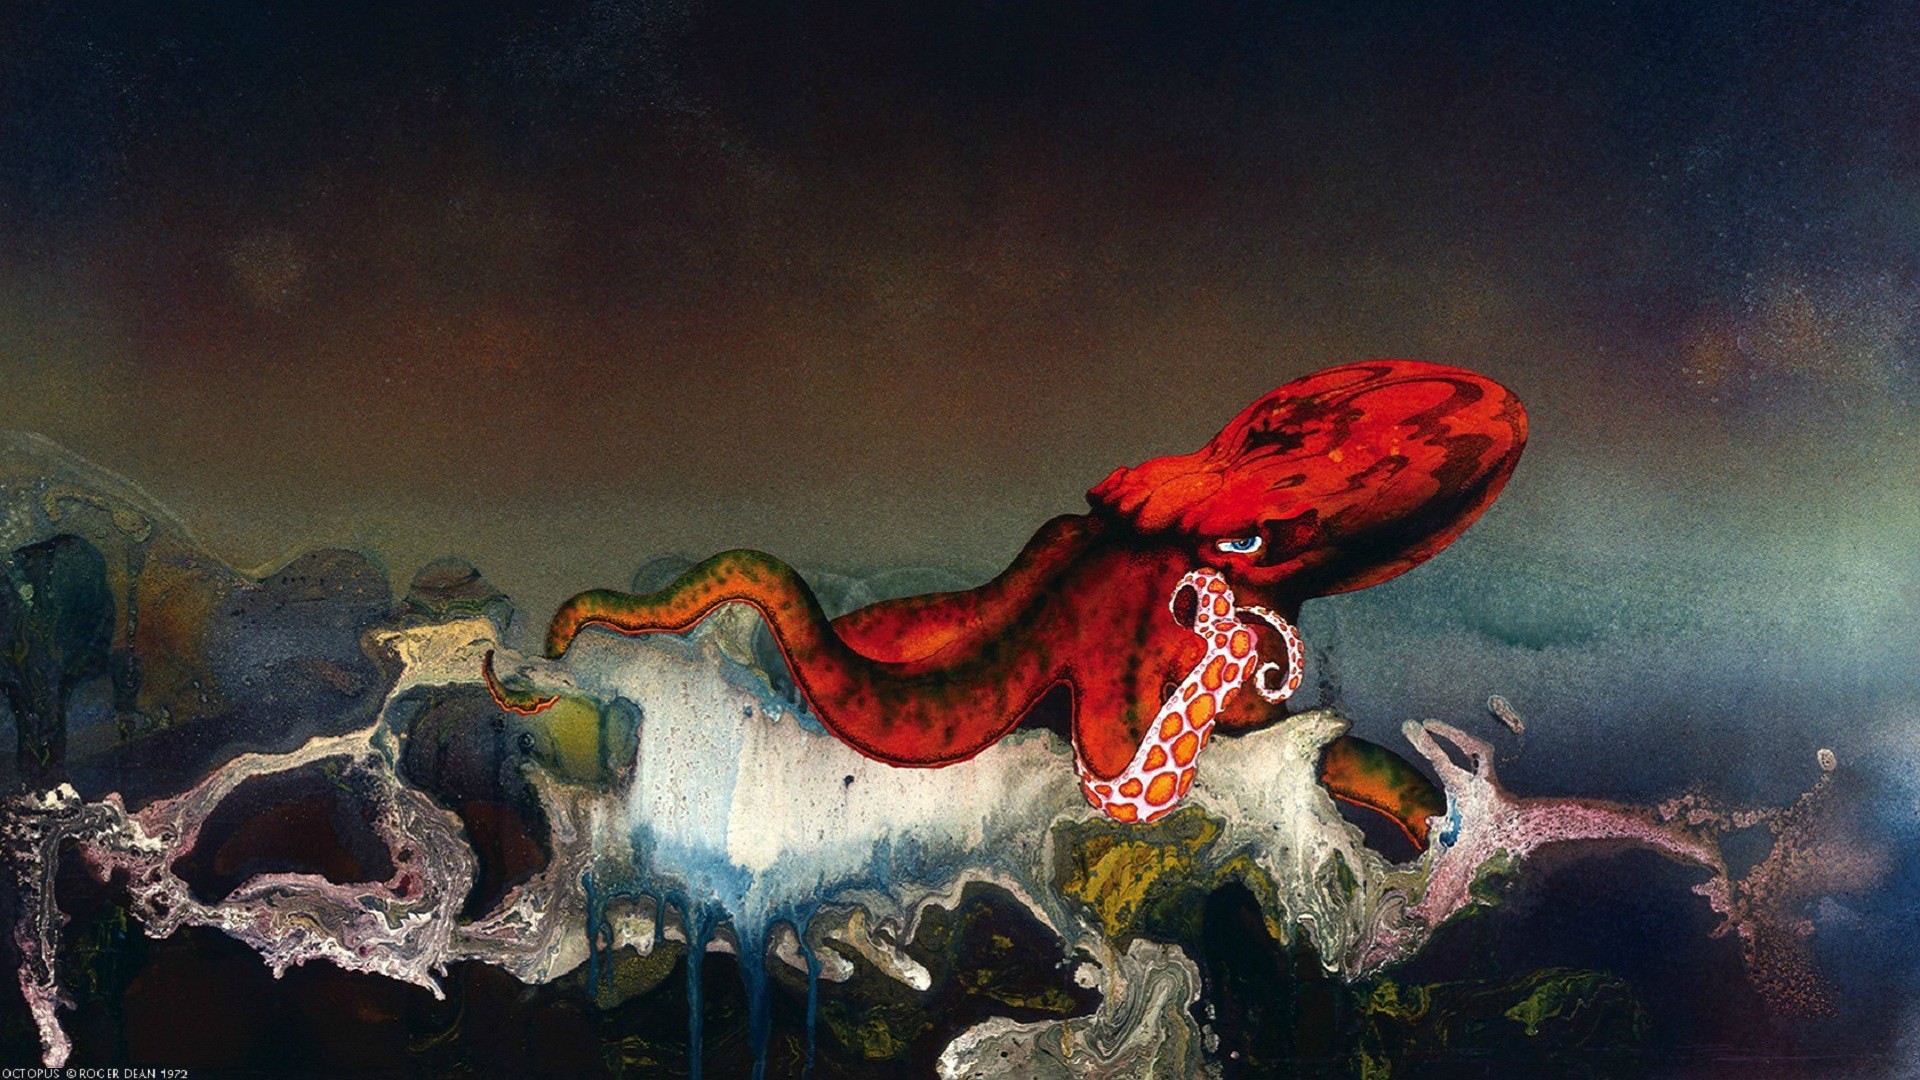 General 1920x1080 octopus ship Roger Dean animals 1972 (Year) album covers